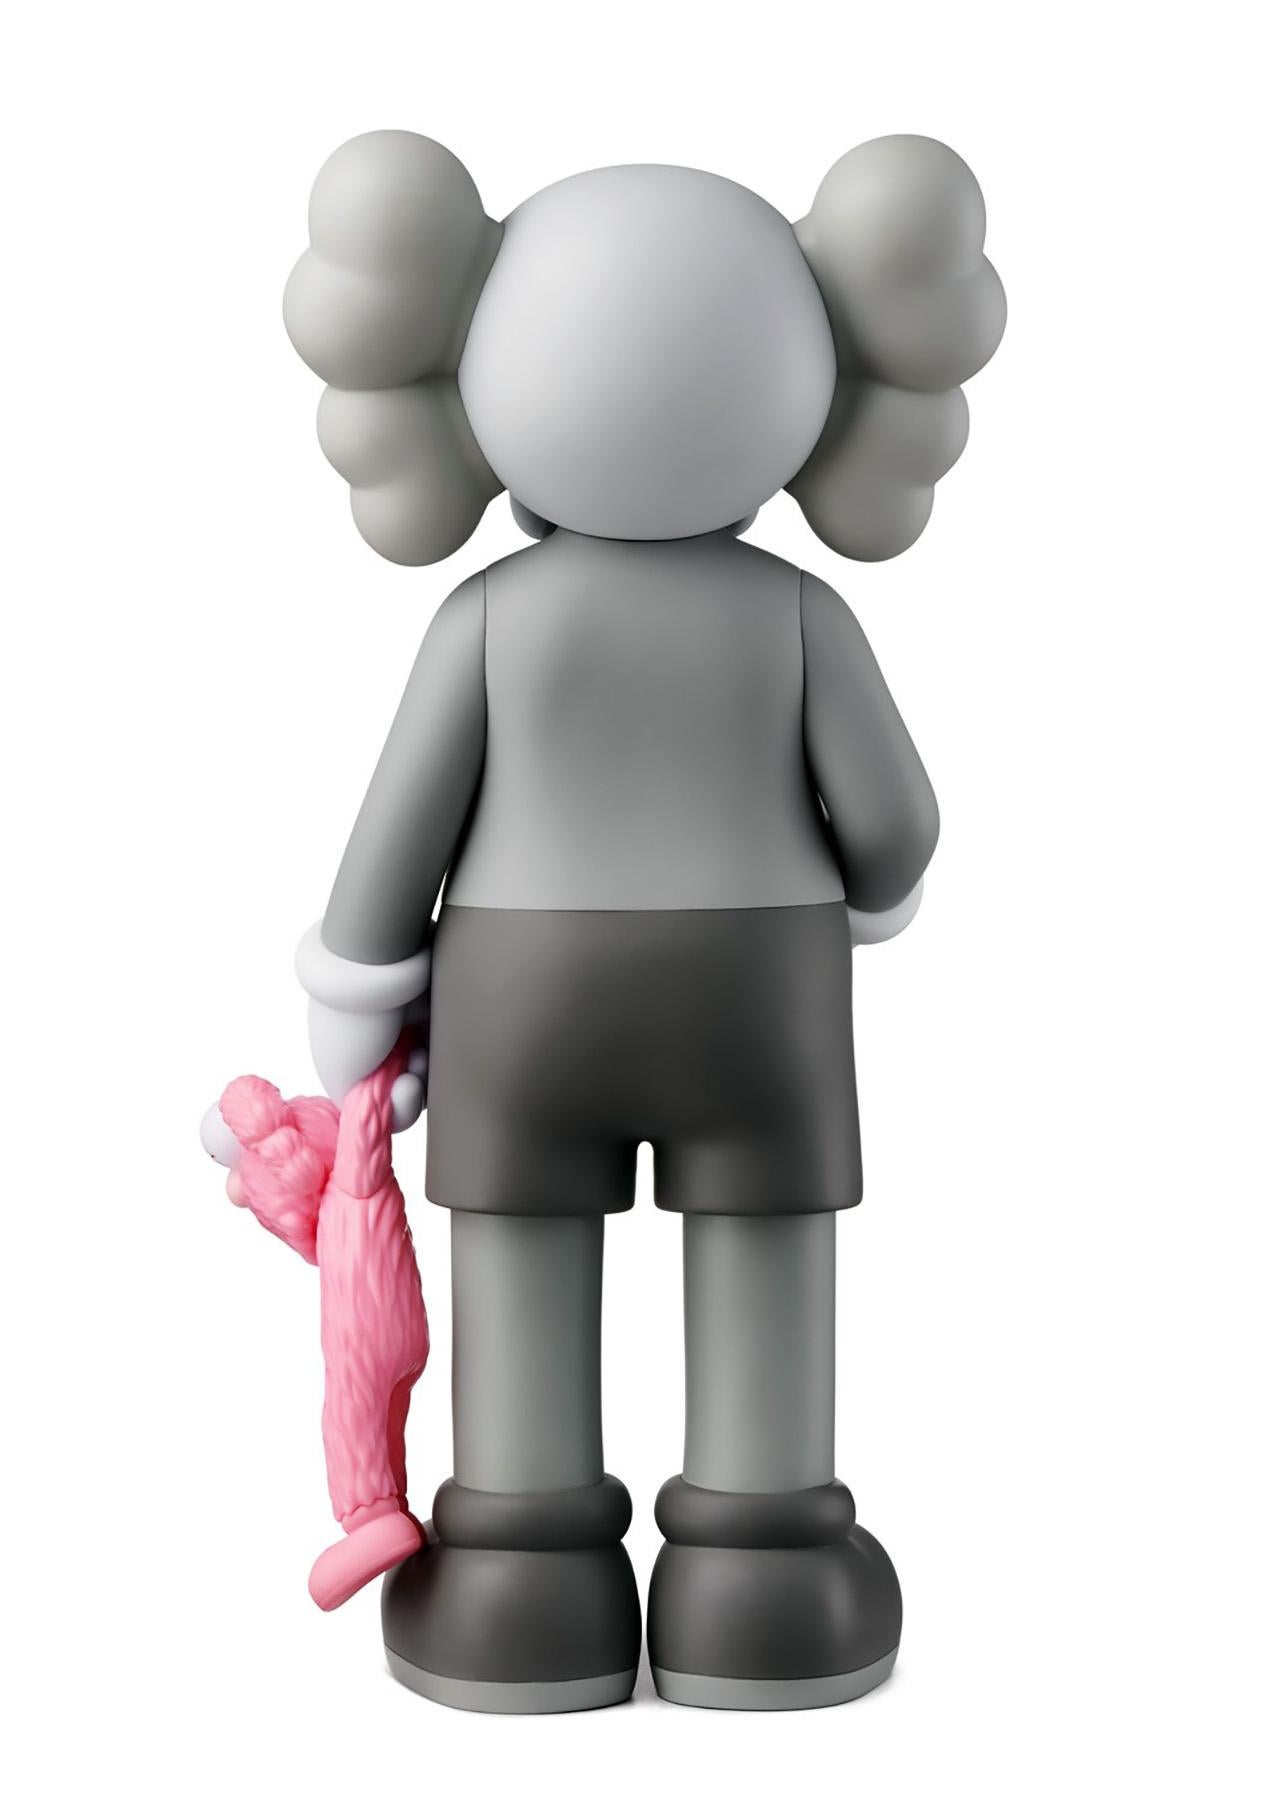 KAWS SHARE (Grey) & KAWS TAKE (Pink): Set of 2 KAWS figurative sculptures, each new & unopened and accompanied by original packaging. 

Medium: Painted Vinyl Cast Resin (applies to each). 
SHARE: 12.4 x 6.3 inches. 
TAKE: 13.4 x 6 inches.
Condition: